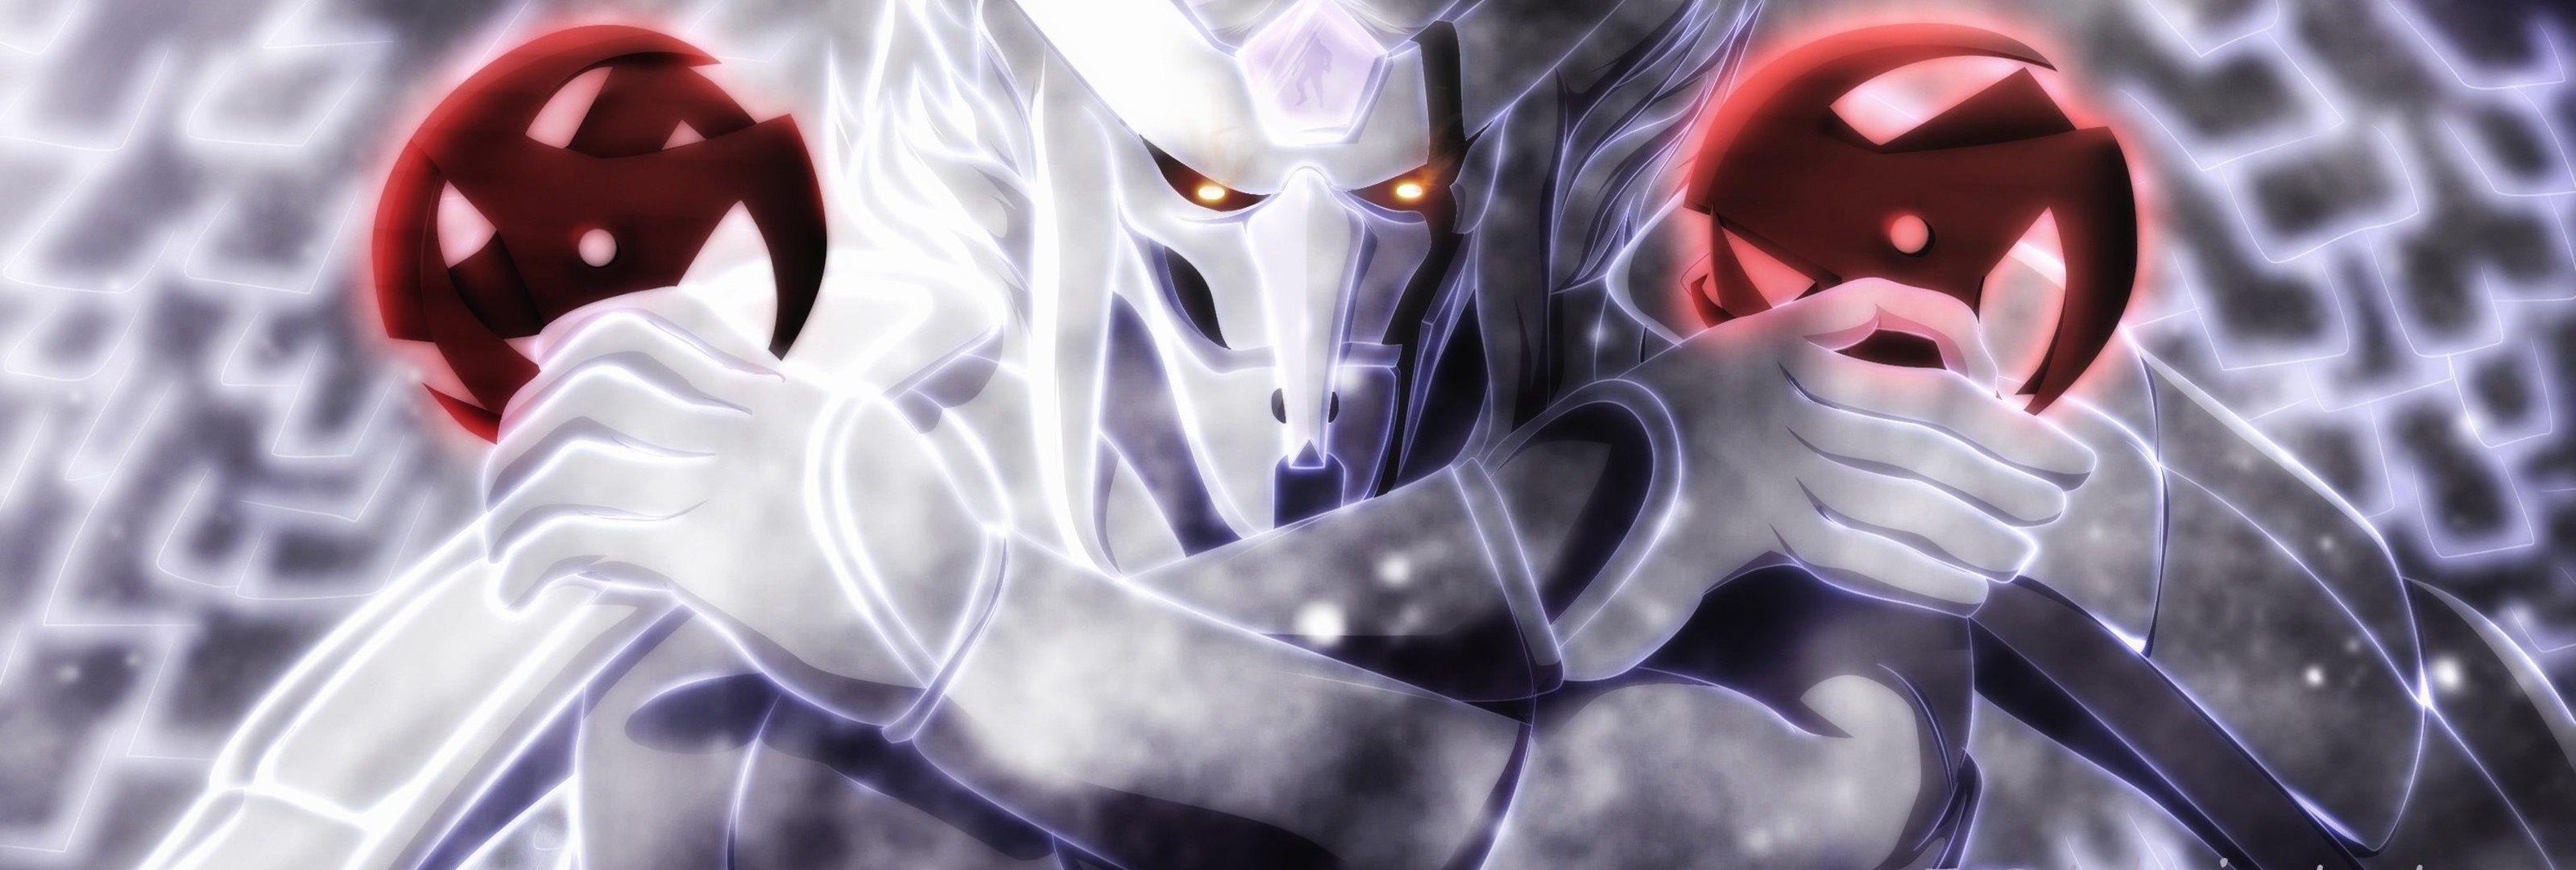 Susanoo Full HD Wallpaper and Background Imagex1080